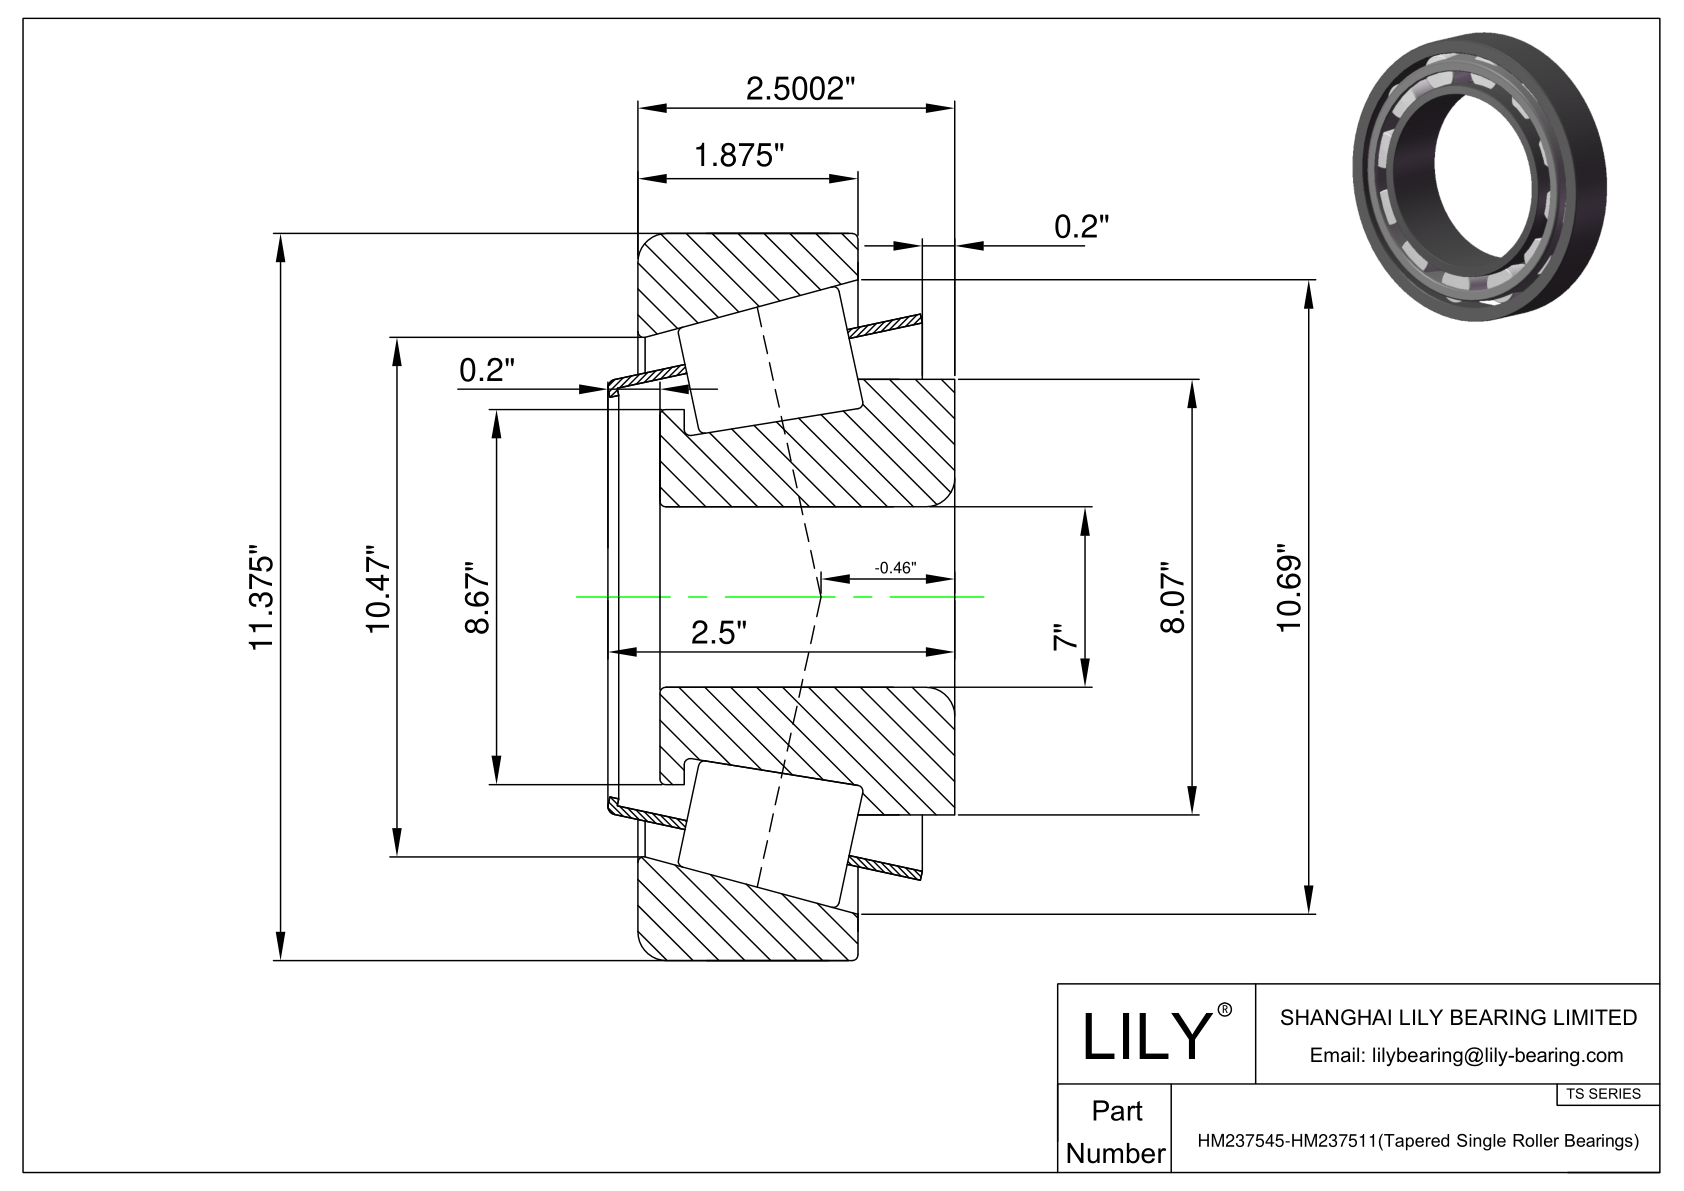 HM237545-HM237511 TS (Tapered Single Roller Bearings) (Imperial) cad drawing